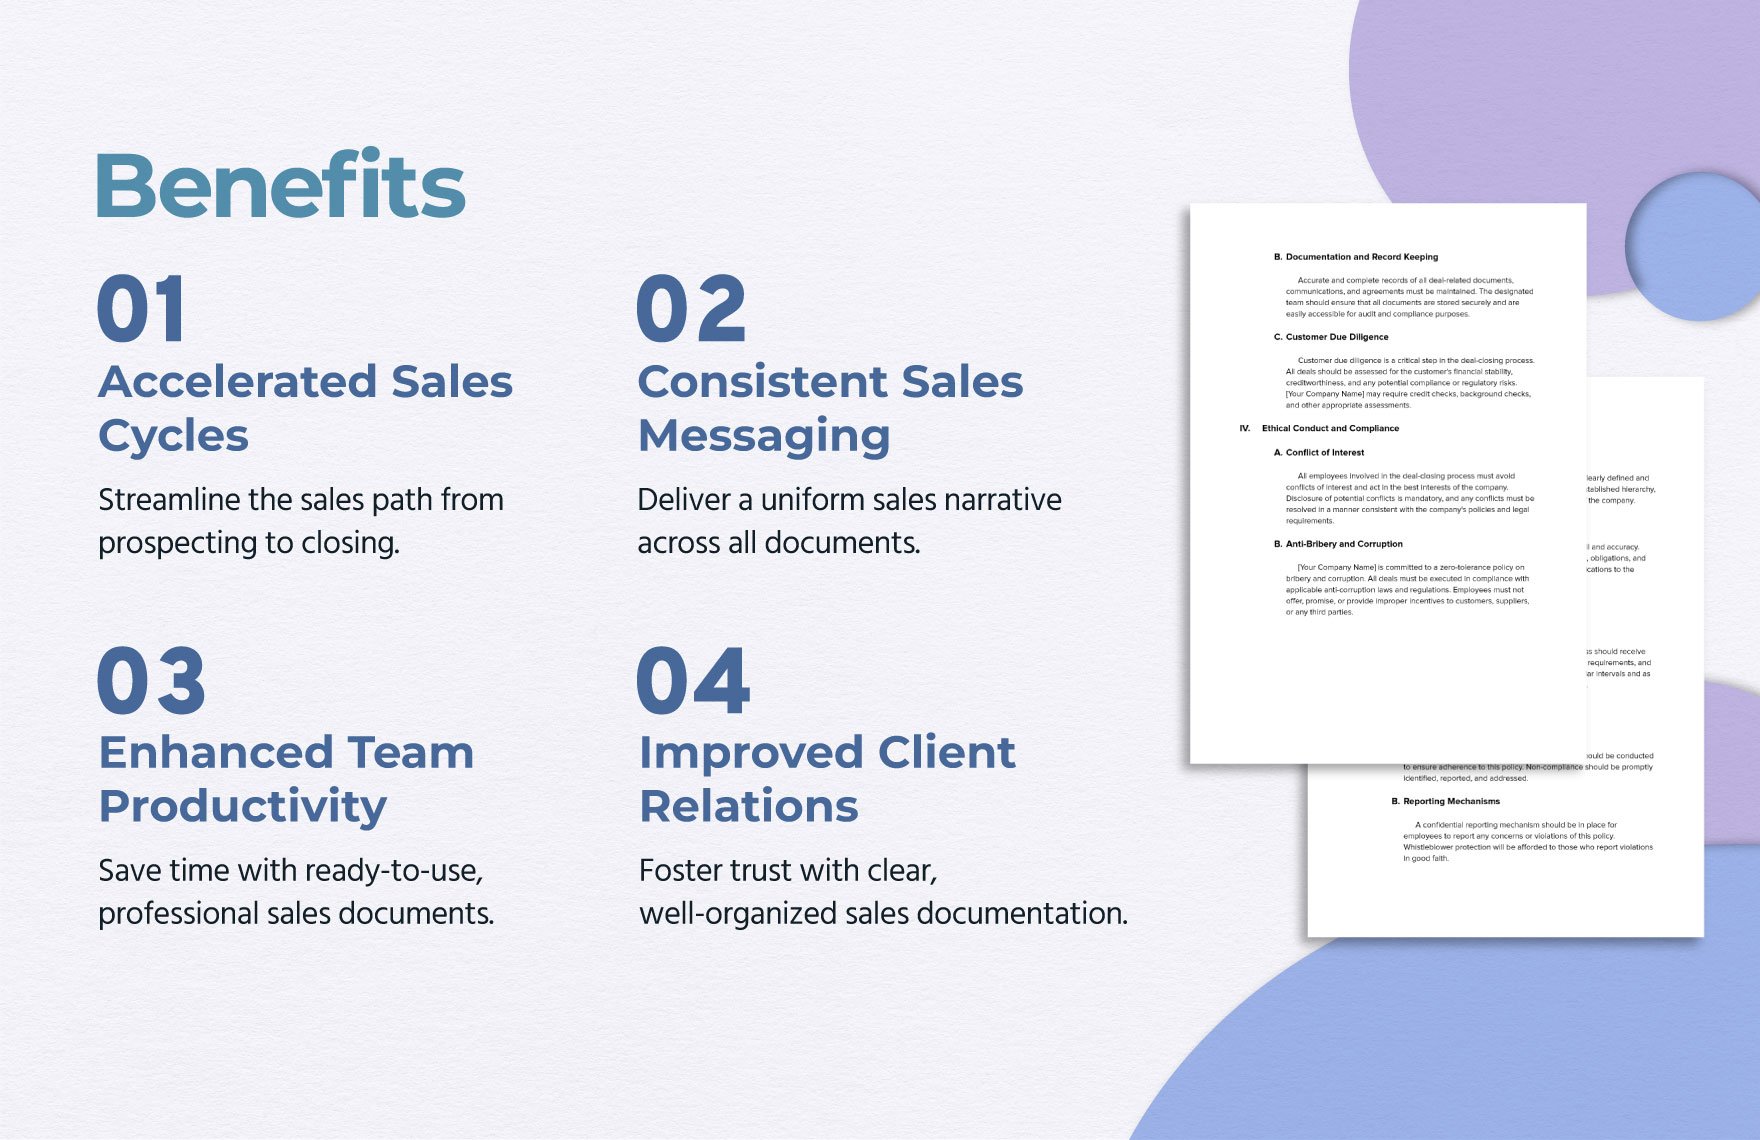 Sales Closing Deal Policy Template